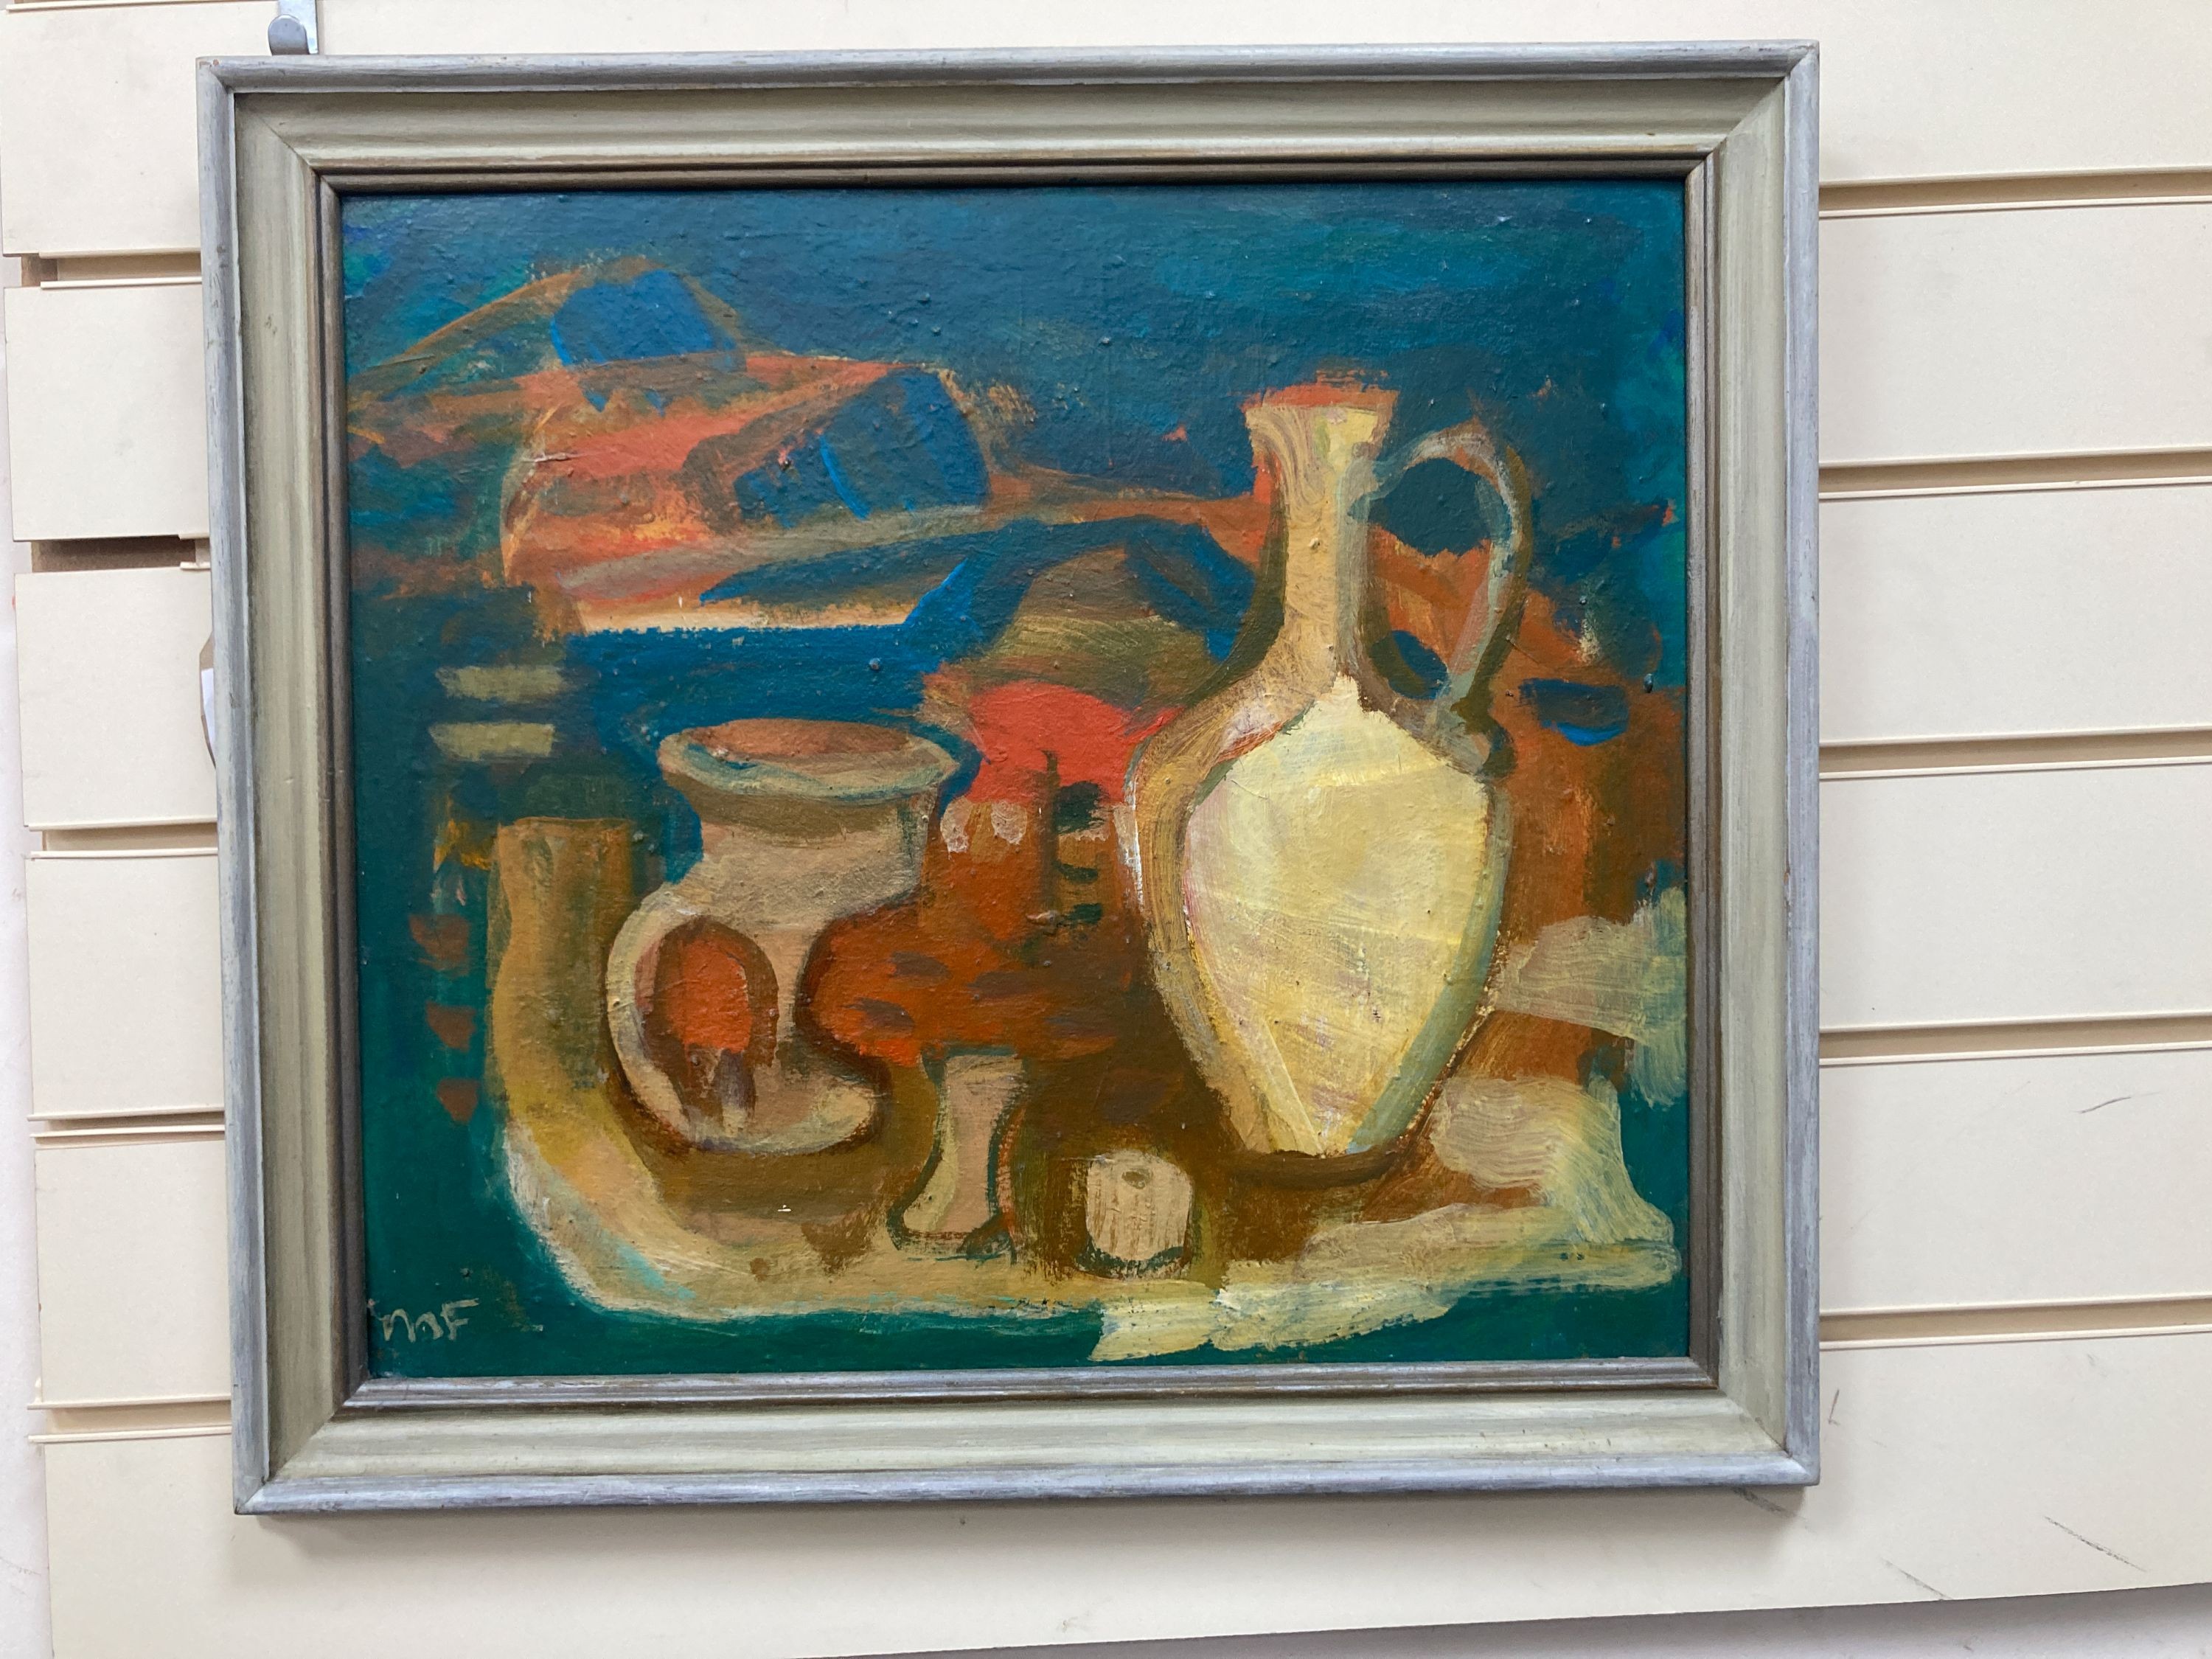 Myrta Fisher (1917-1999), oil on board, still life with jug, signed, 40 x 45cm.